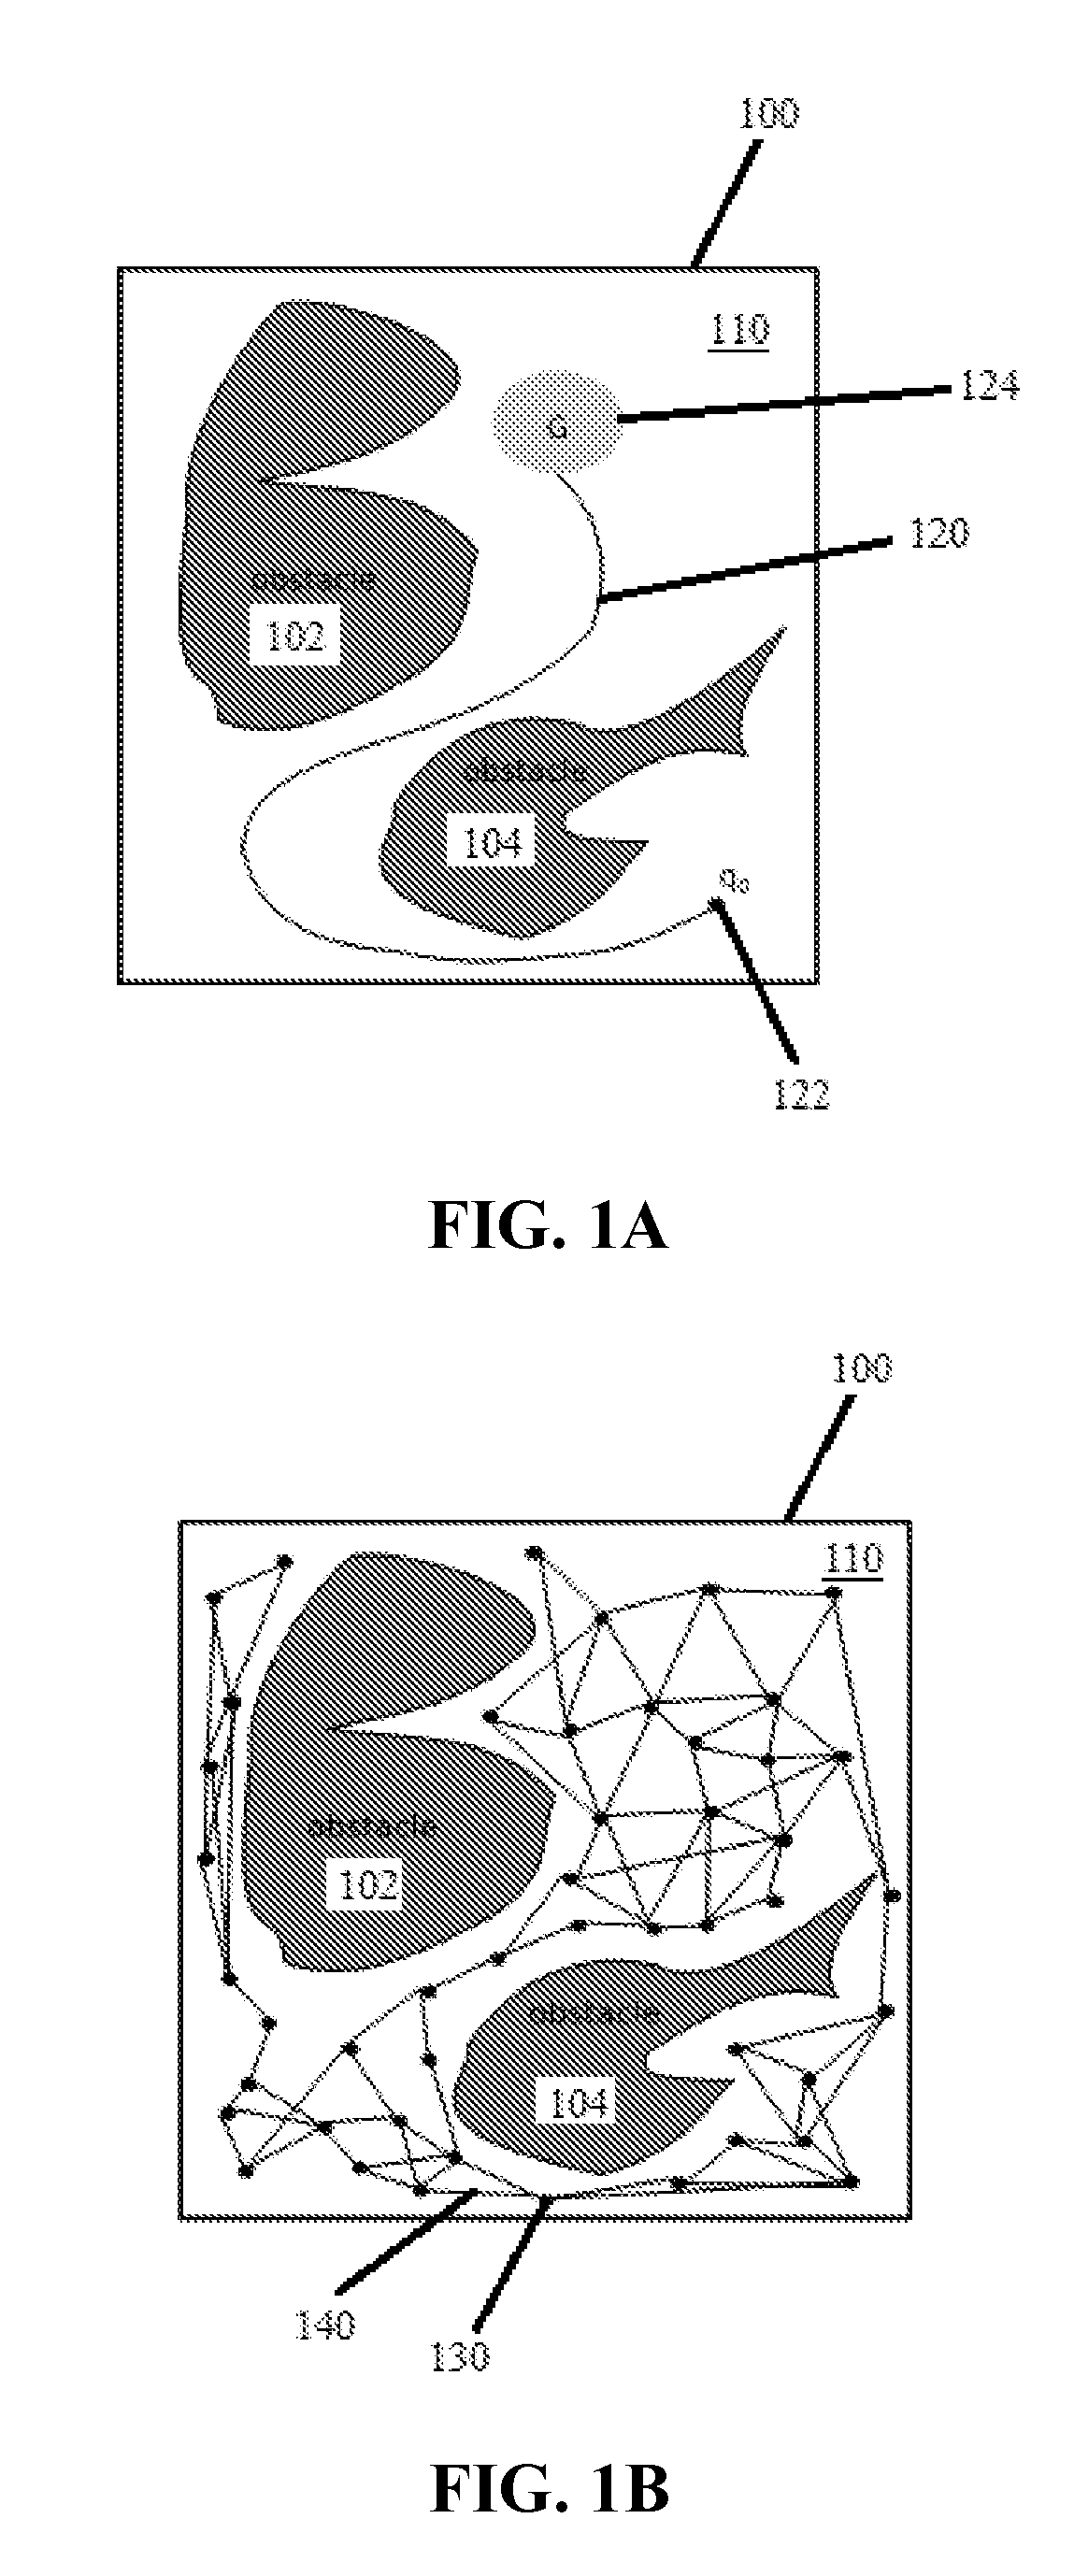 Specialized robot motion planning hardware and methods of making and using same